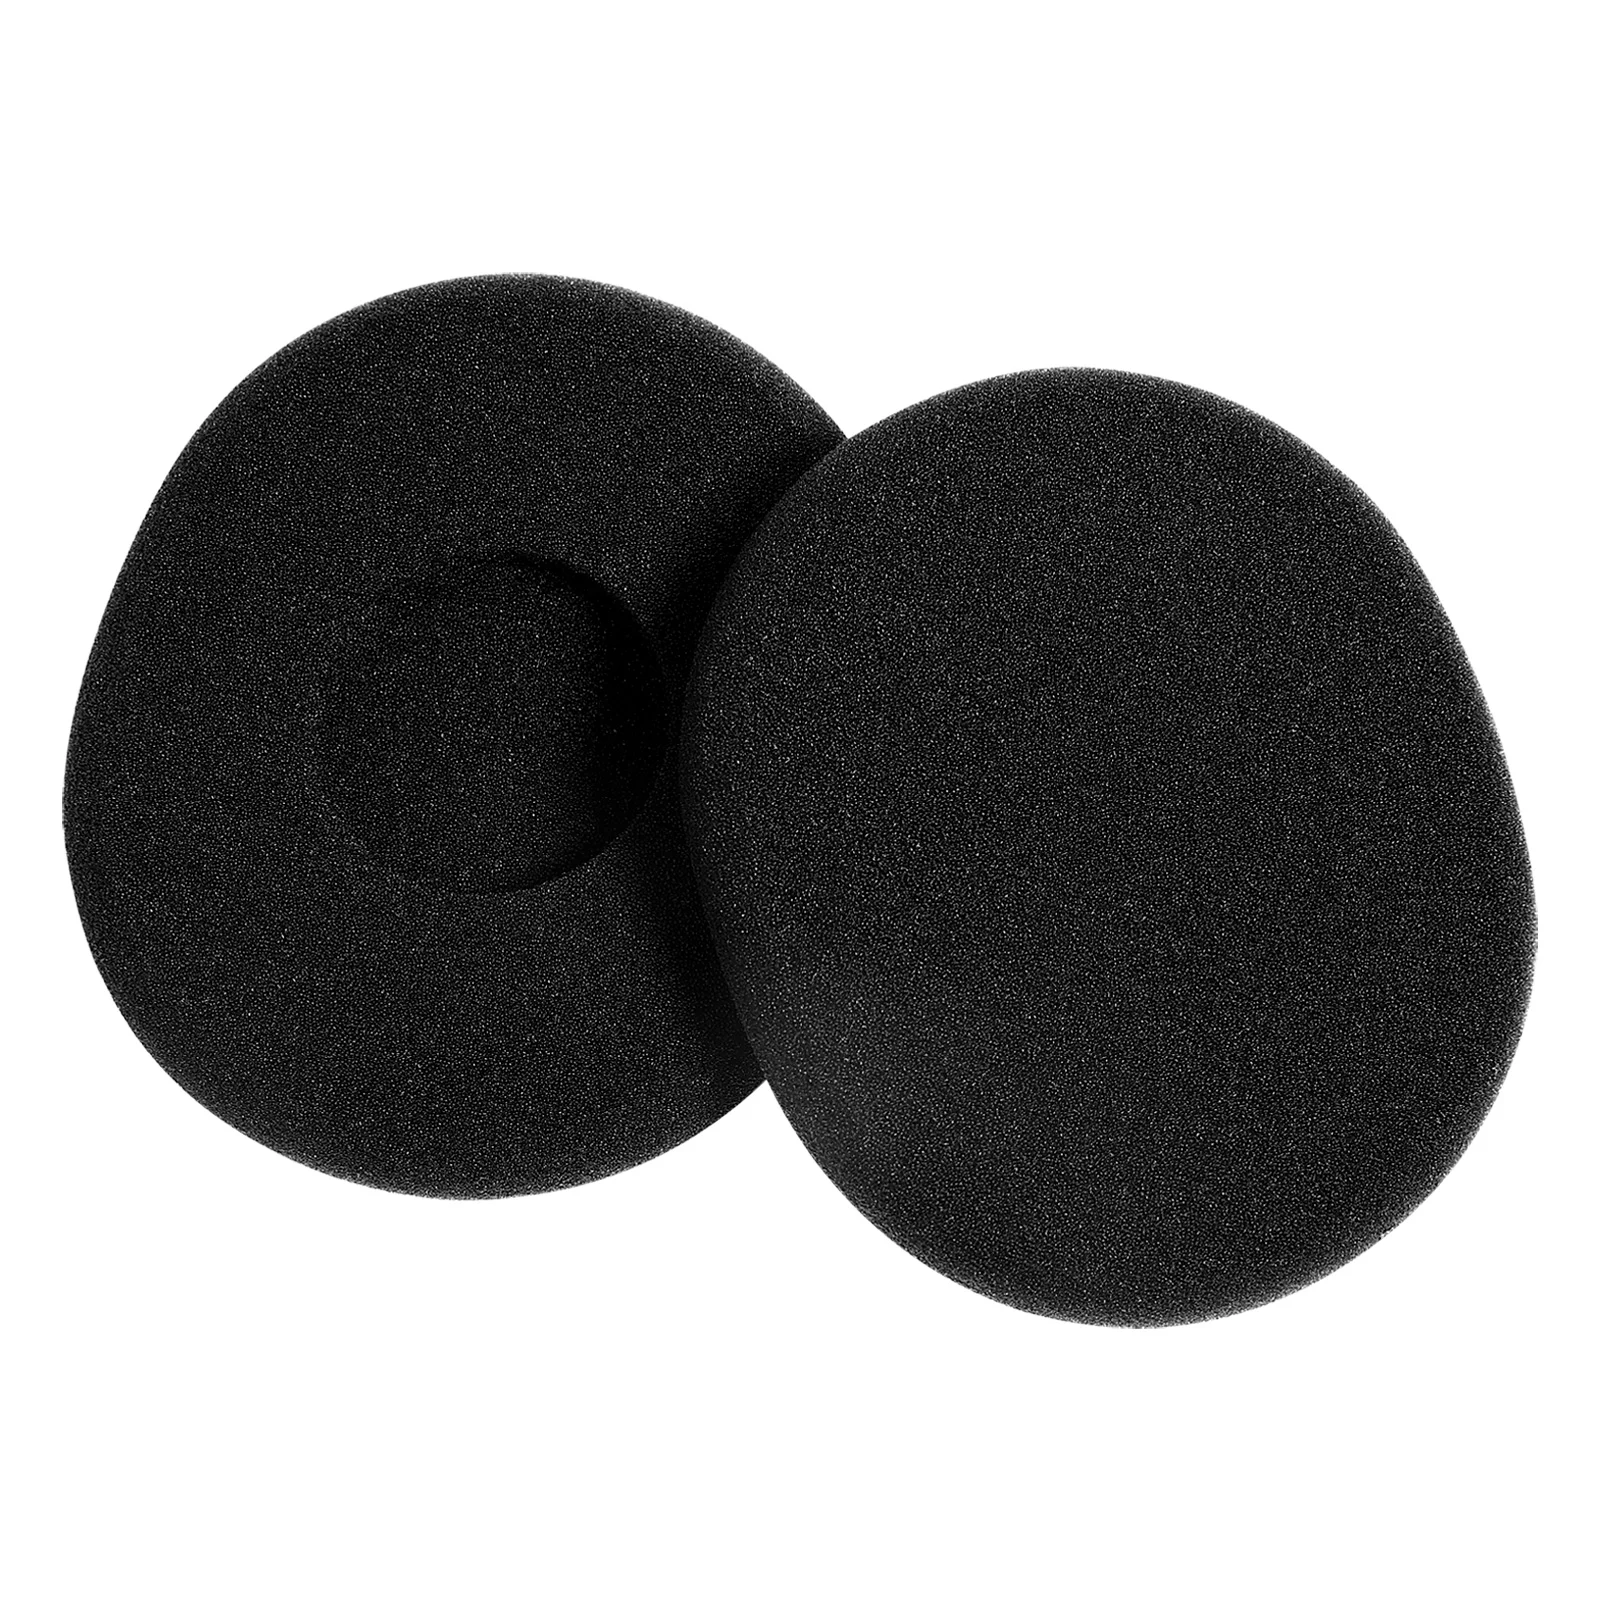 

Replacement Ear Pads Ear Cushions Memory Earpads Comfortable Headphone Covers Headset Covers for Adults Men 75x65mm